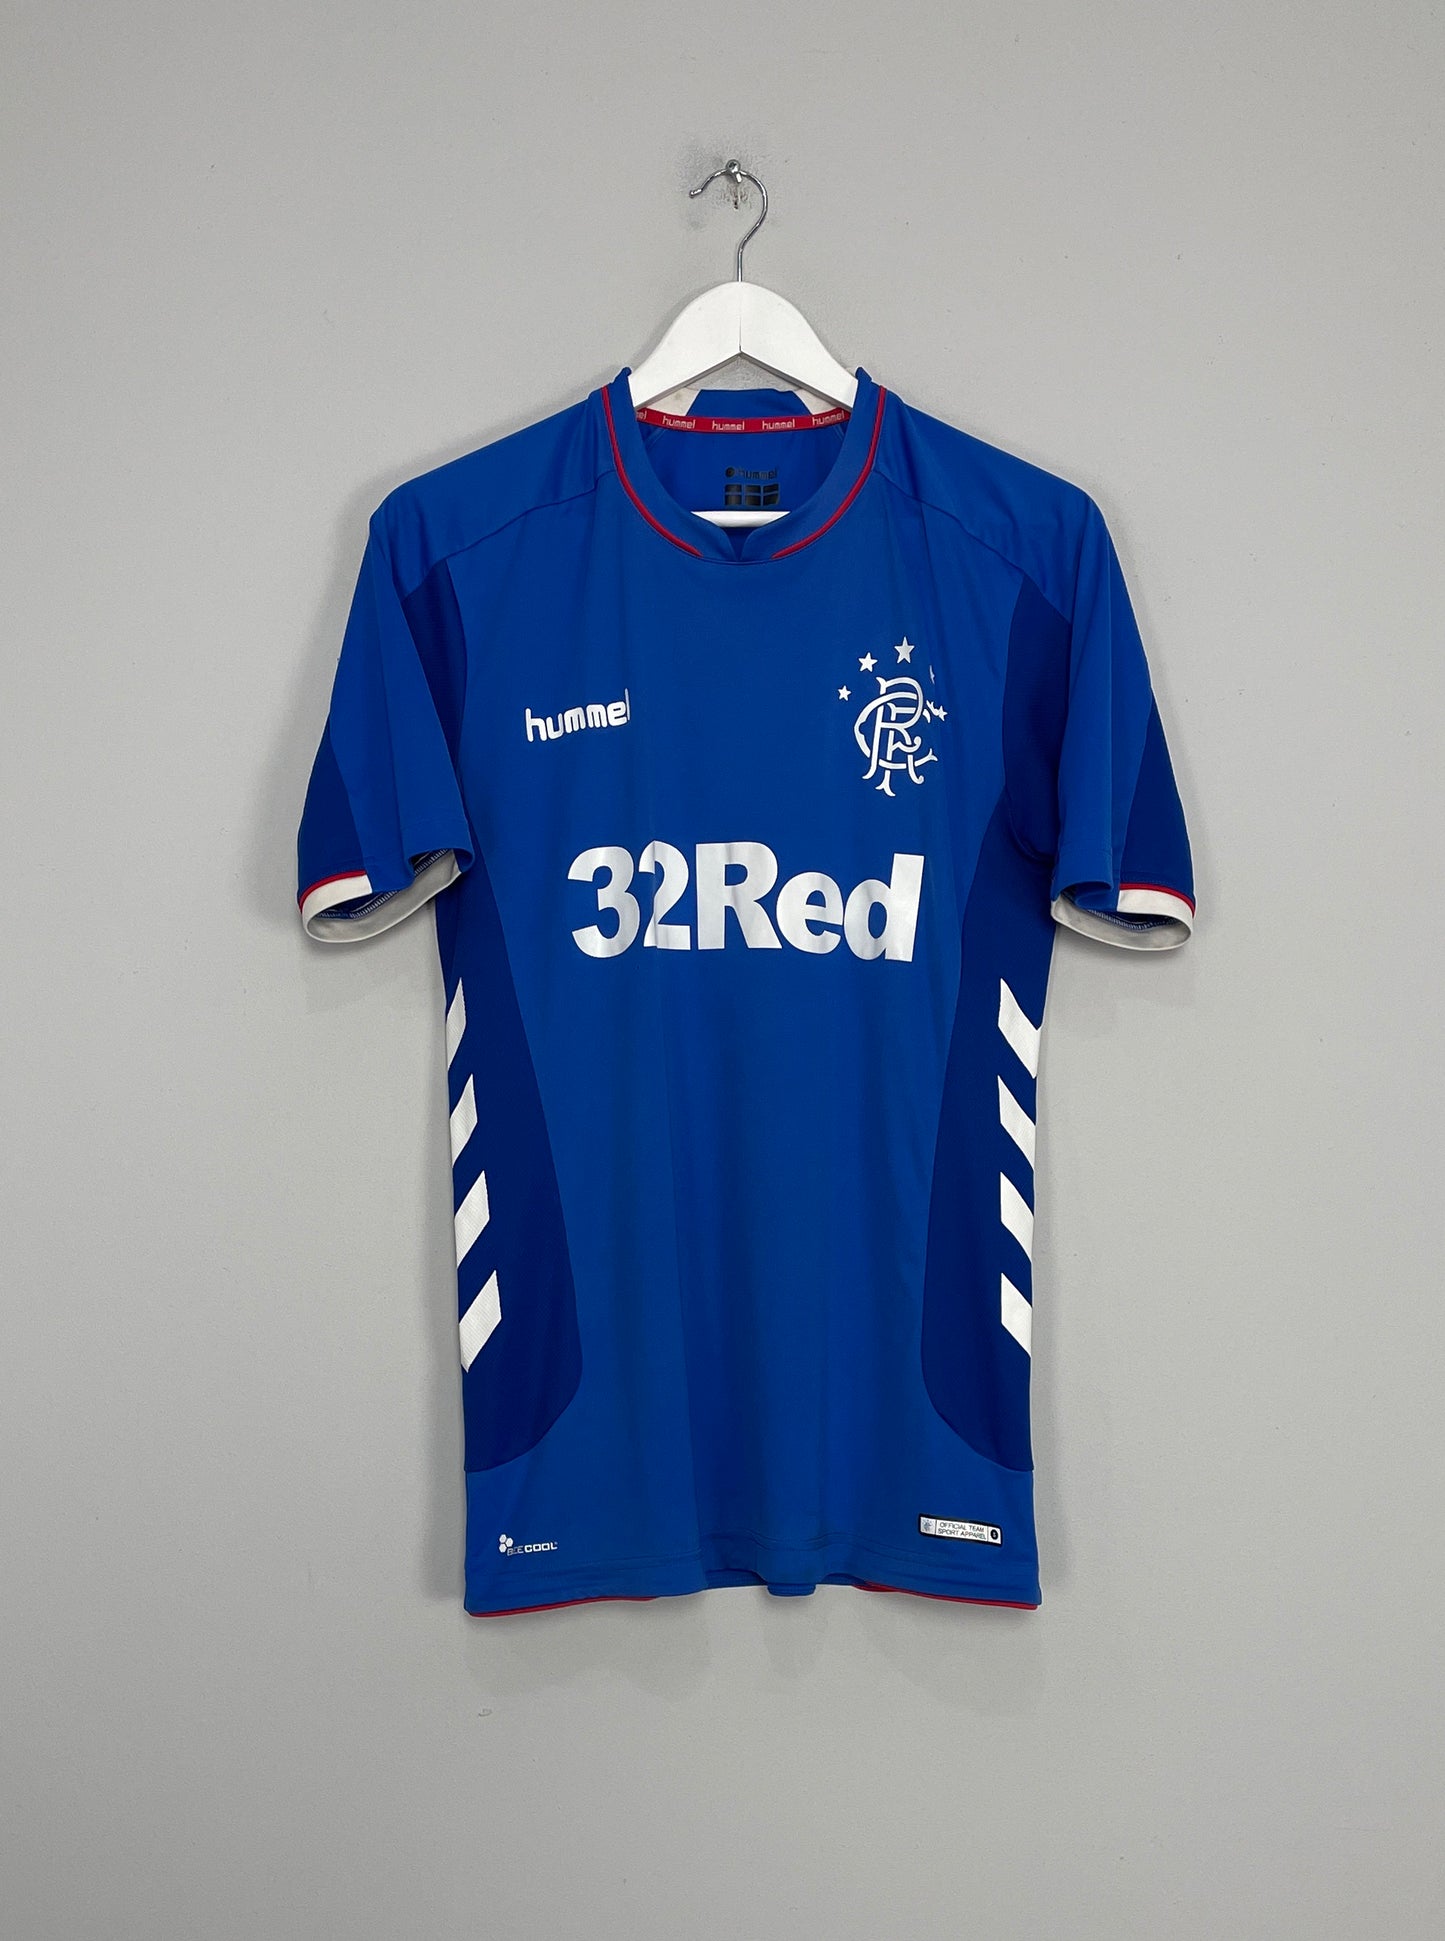 Image of the Rangers shirt from the 2018/19 season